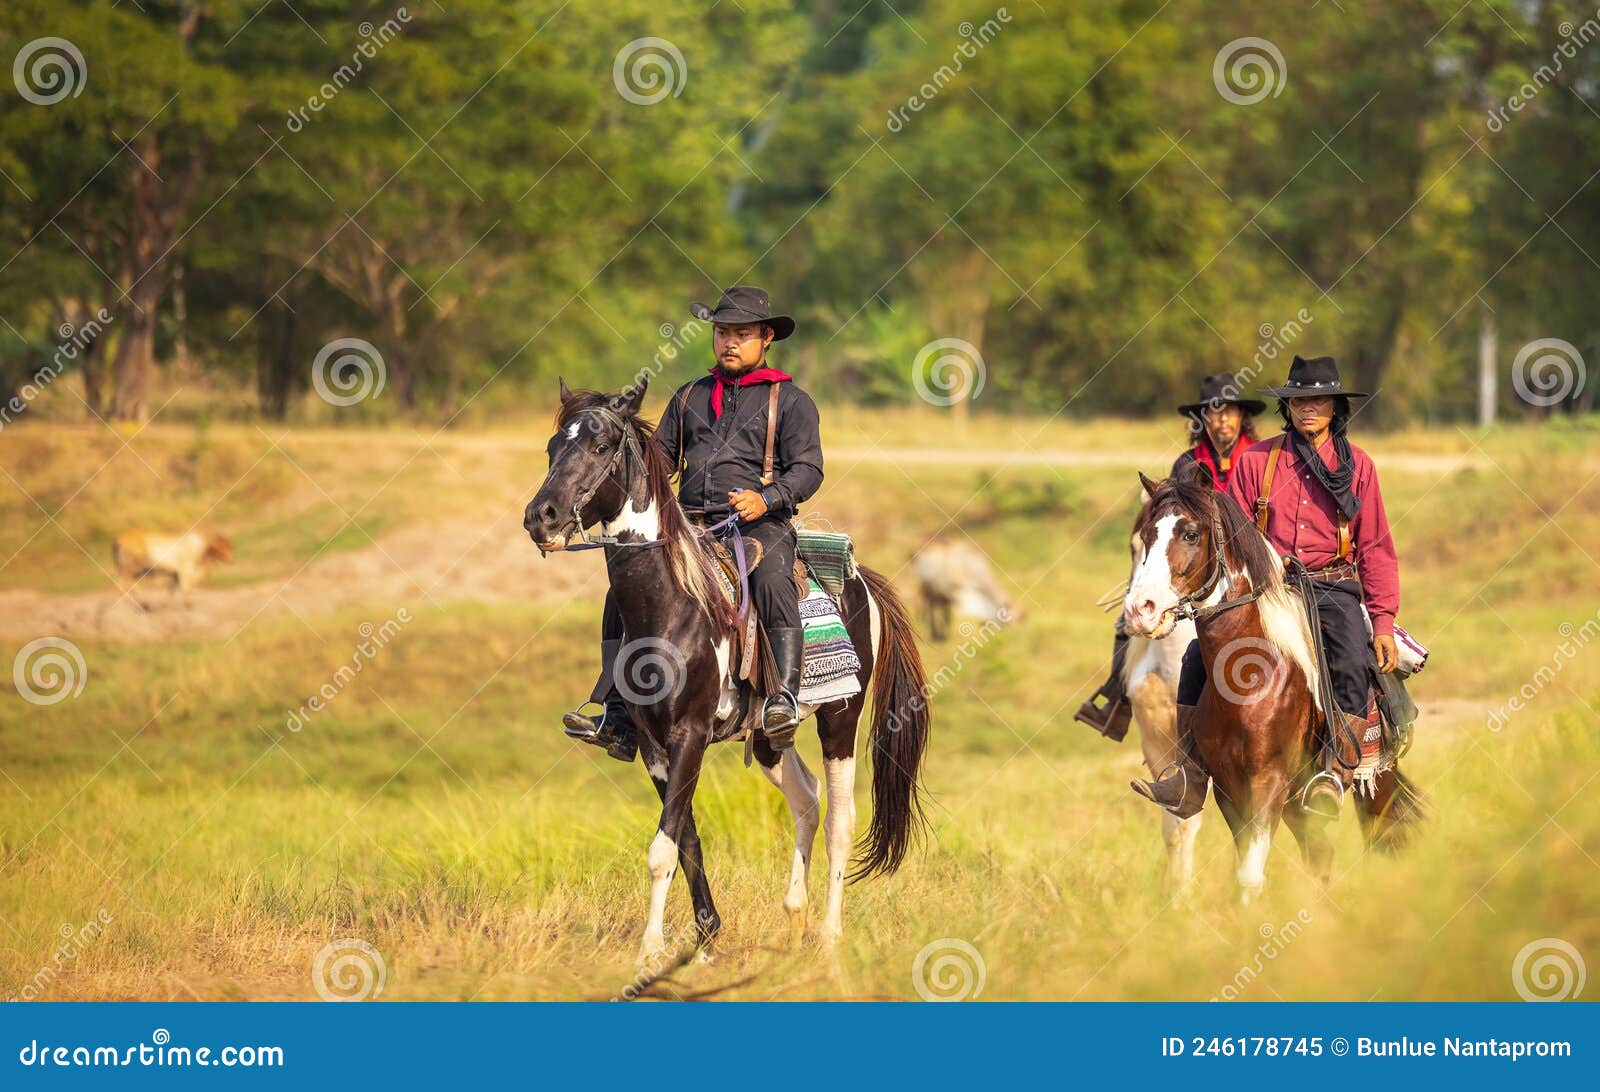 cowboy`s way of life include riding a horse around locales